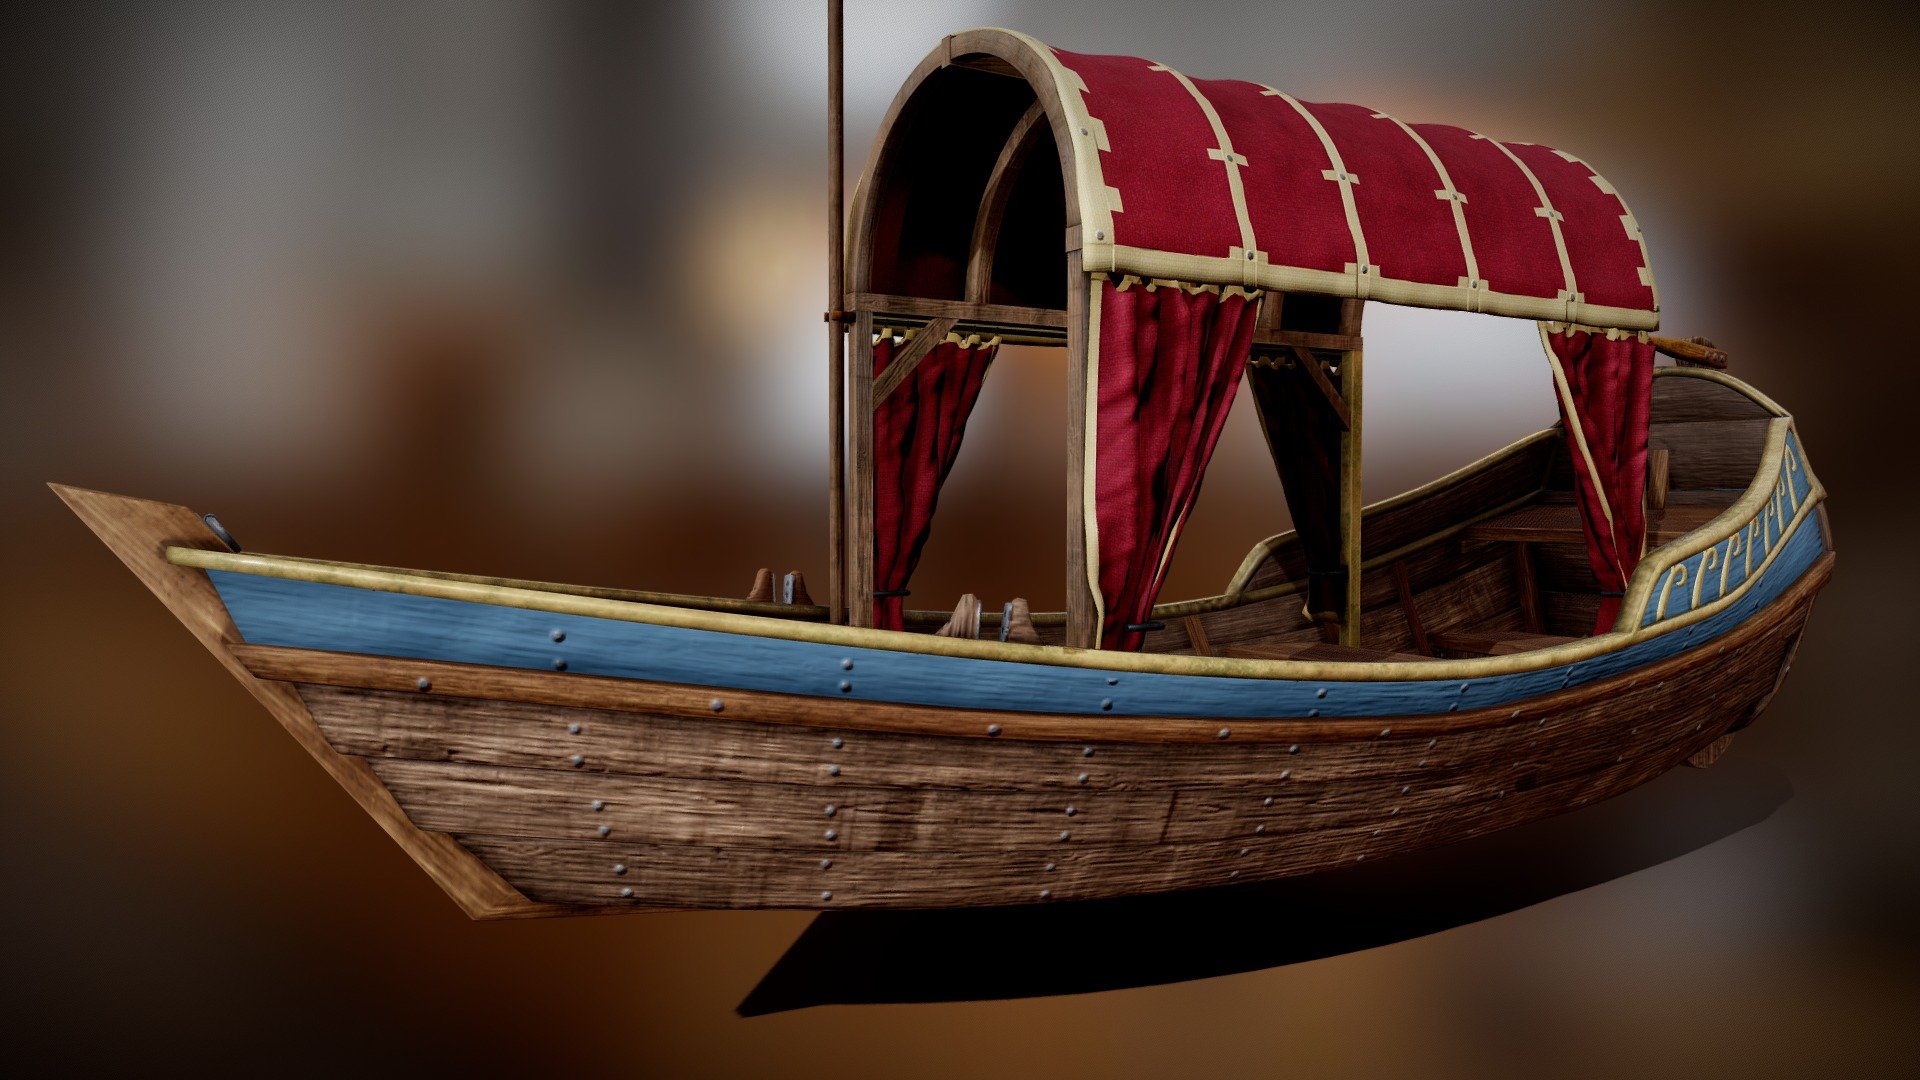 This boat was used by castle inhabitants and visitors to make recreational tours on the lake surrounding the castle. It provides protection against the sun, as it was common in those times to avoid any tanning (which was associated with labour and working on the field).  The long stick is used both for punting and mooring the boat 3d model